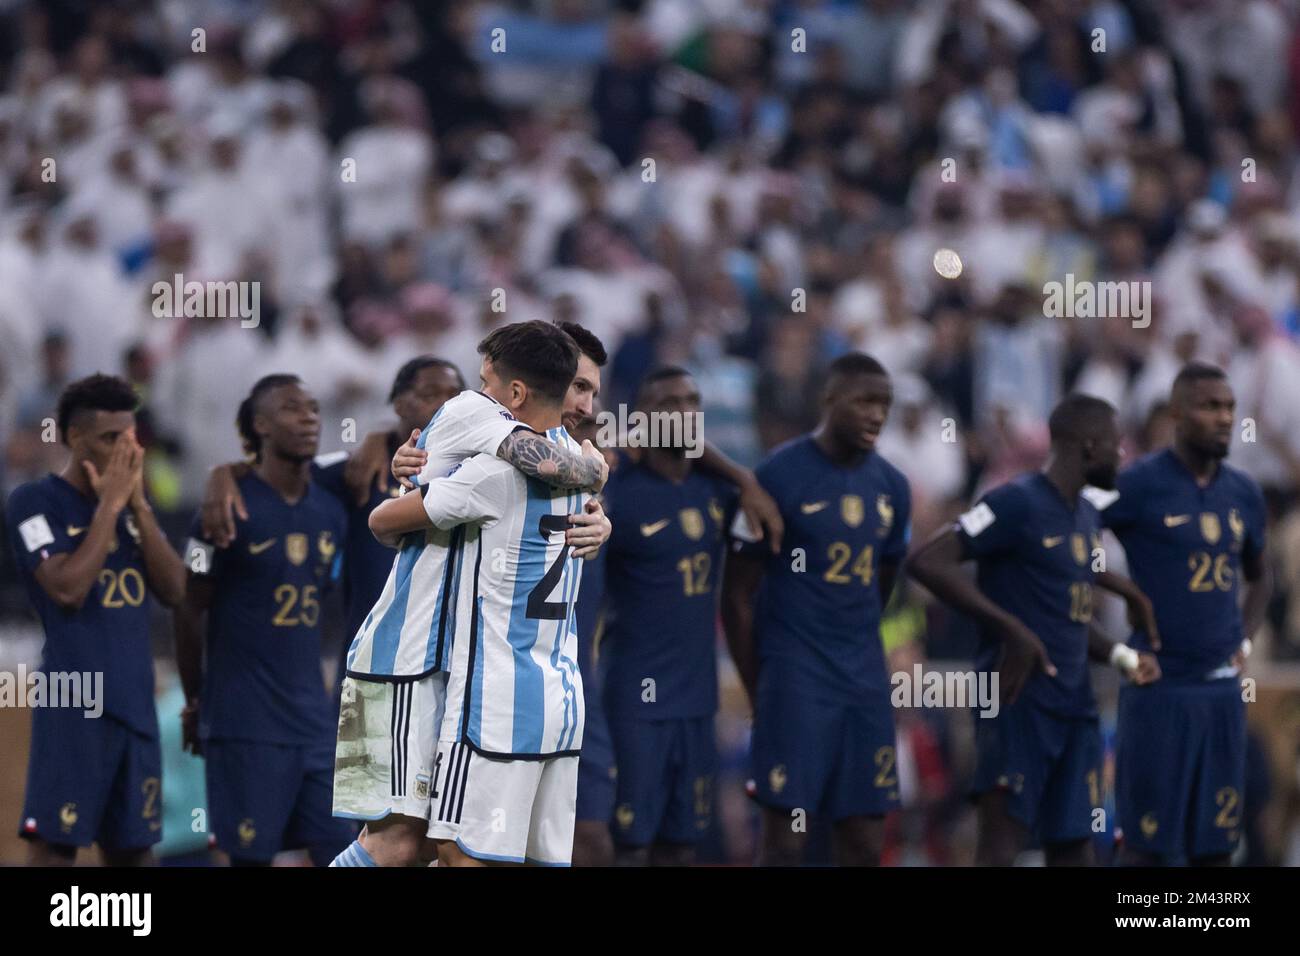 Doha, Brazil. 18th Dec, 2022. Qatar - Doha - 12/18/2022 - 2022 WORLD CUP FINAL, ARGENTINA X FRANCE - Messi and Dybala Argentina players celebrate a goal scored from the penalty spot during a match against France at the Lusail stadium for the 2022 World Cup championship. Photo: Pedro Martins/AGIF/Sipa USA Credit: Sipa USA/Alamy Live News Stock Photo